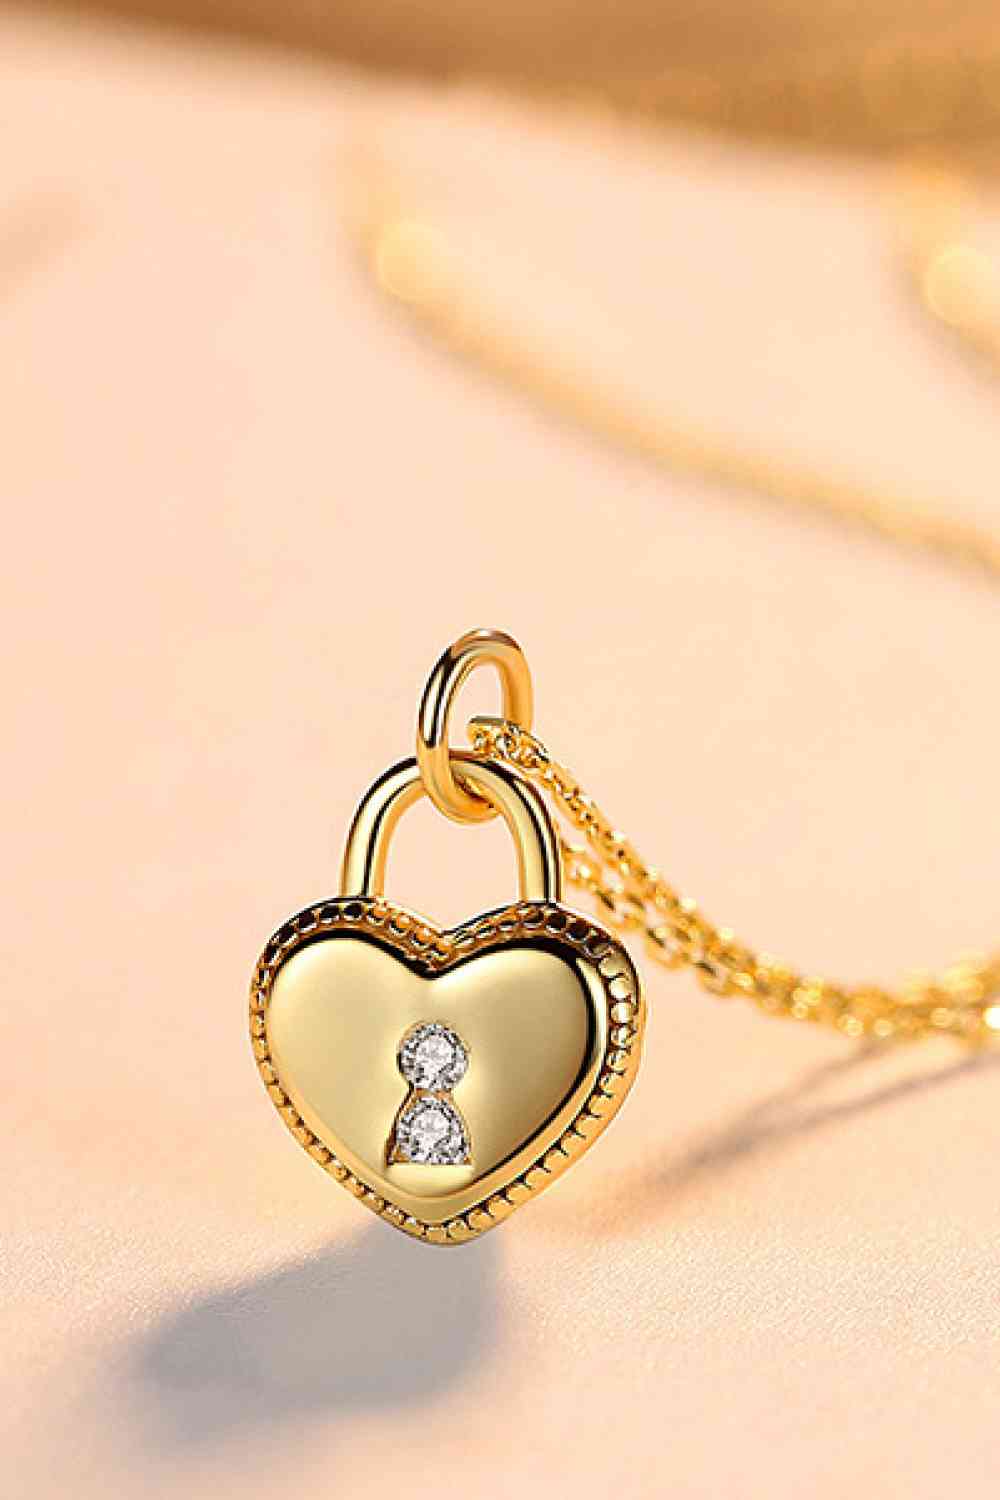 2 Luxurious 925 Sterling Silver Heart Necklace